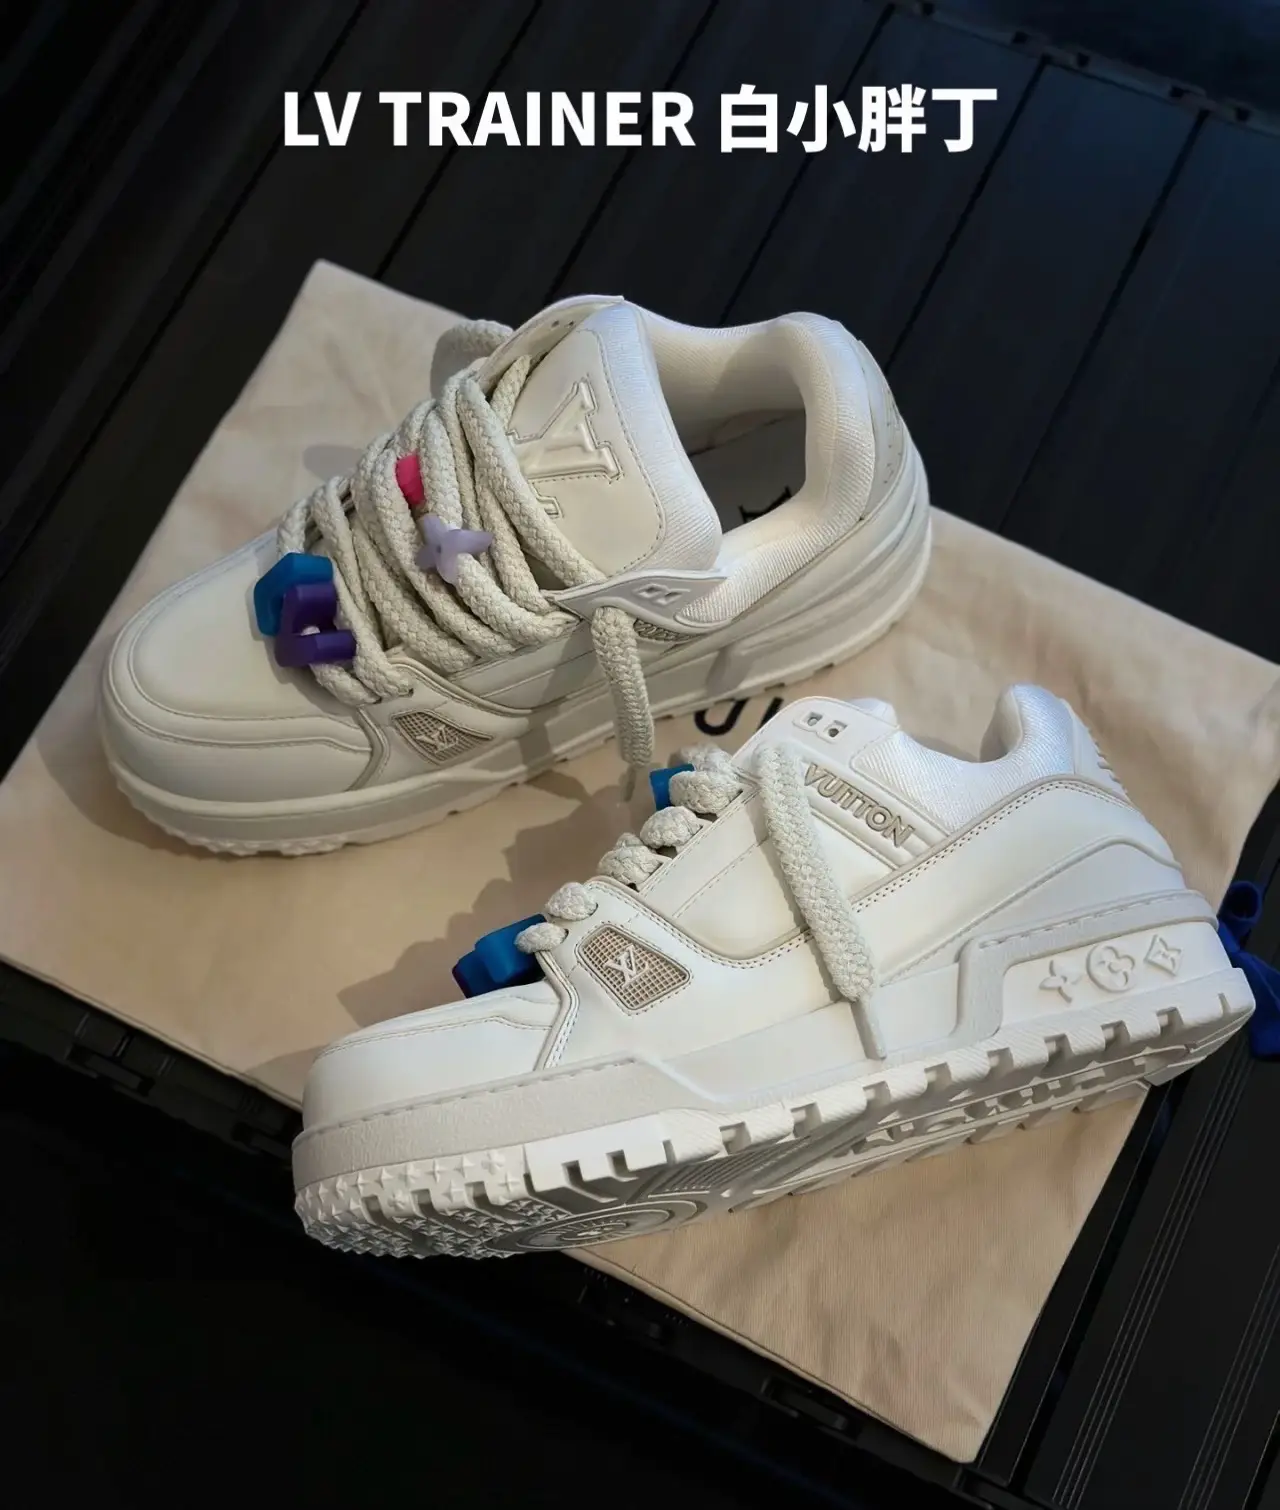 LV TRAINER MAXI 白小胖丁, Gallery posted by Emma Amme